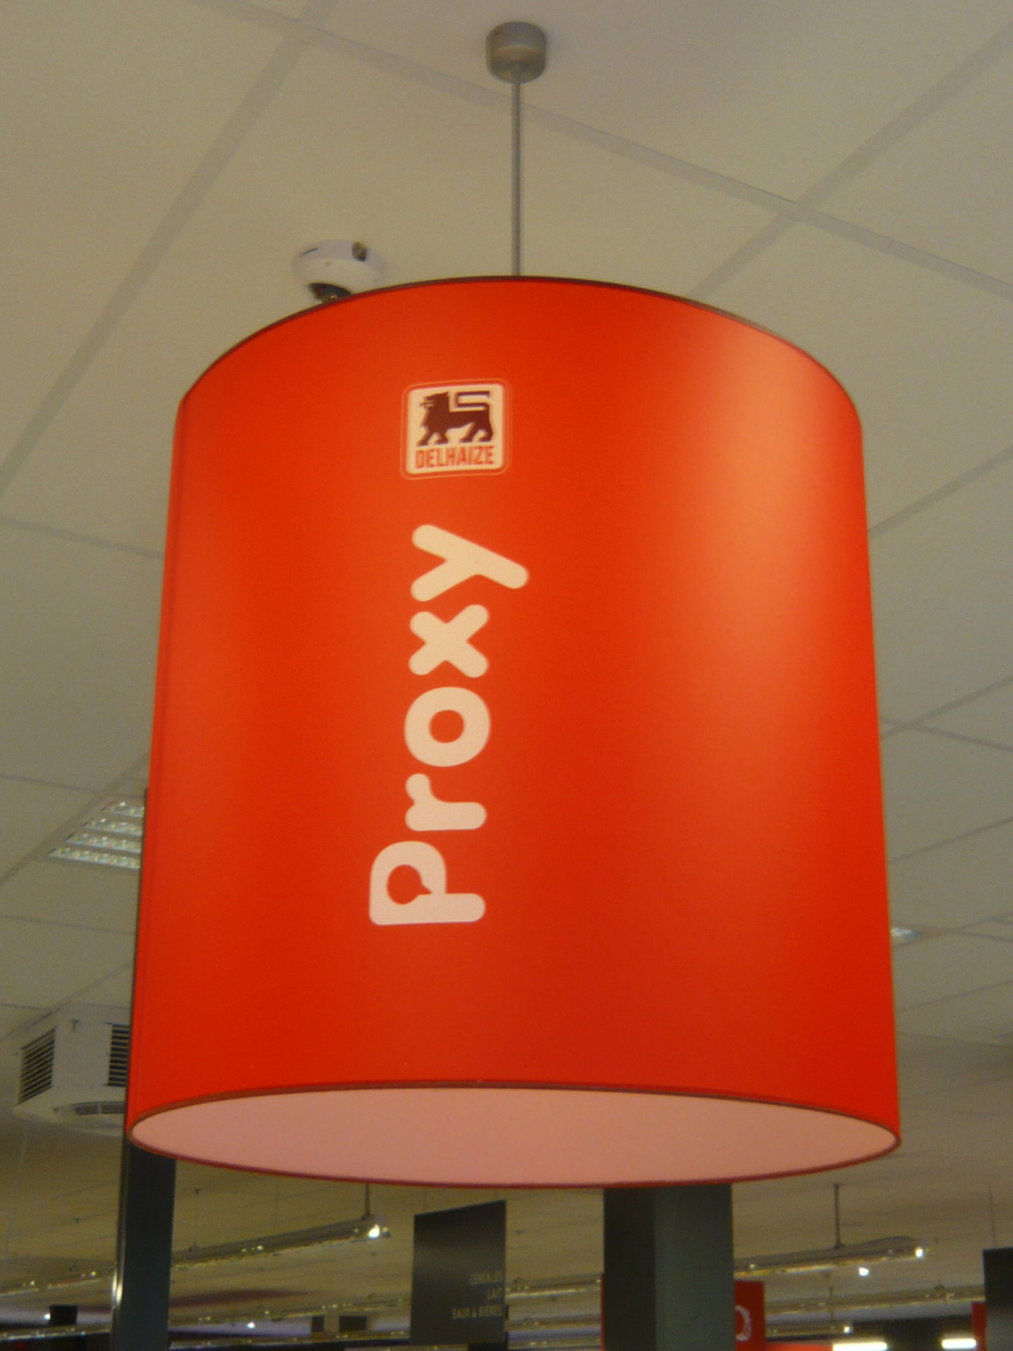 printed lamp shades for proxy delhaize